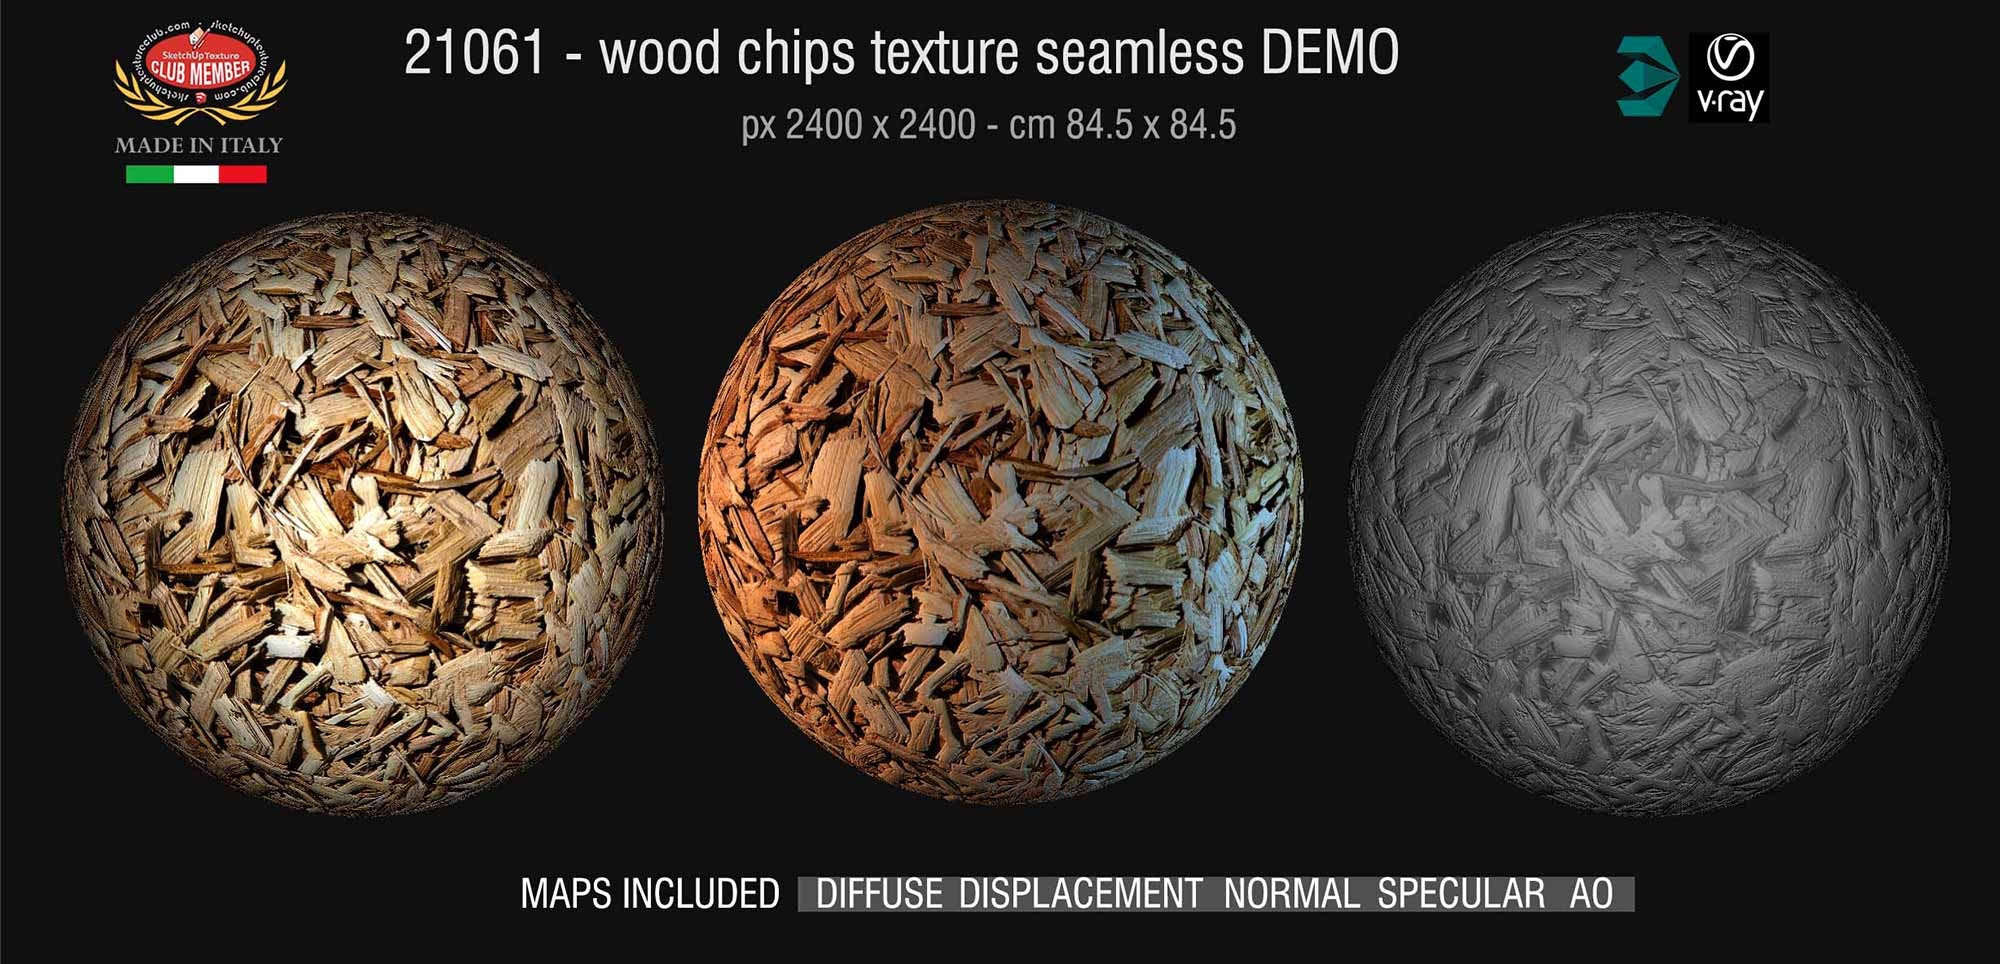 21061 Wood chips PBR texture seamless demo